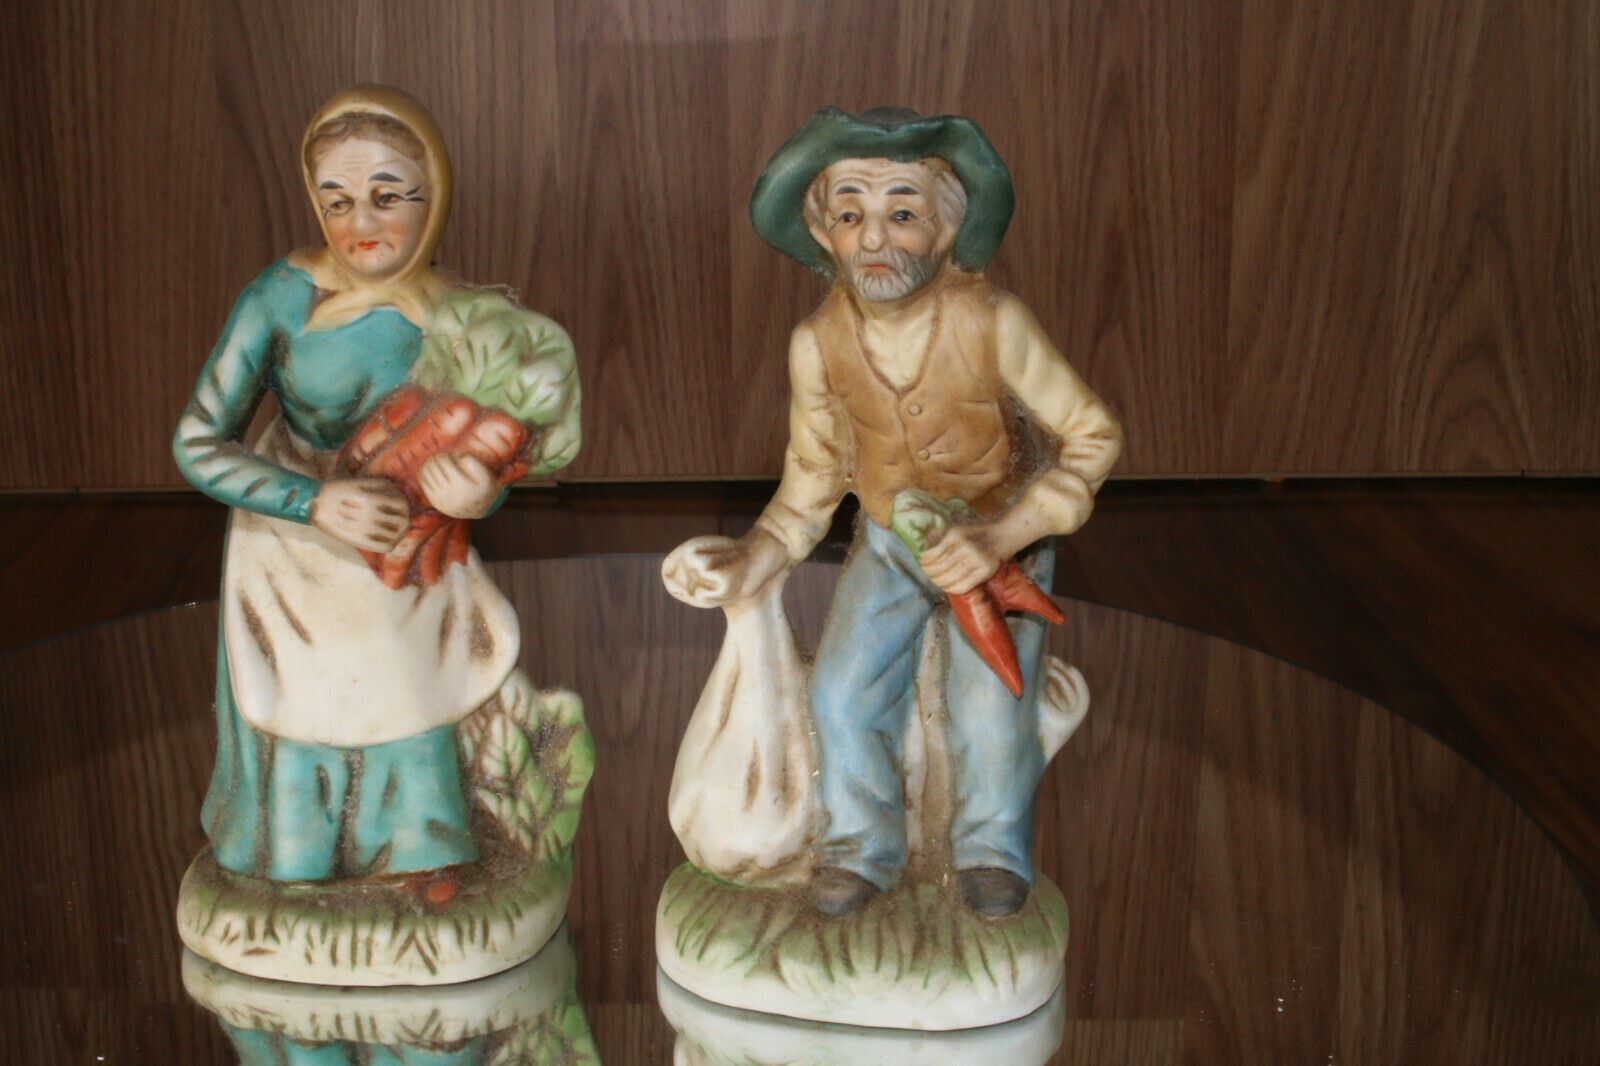 VINTAGE FBIA Set of Old Man Old Woman Farmers or Grandparents Figurines Pre-1949